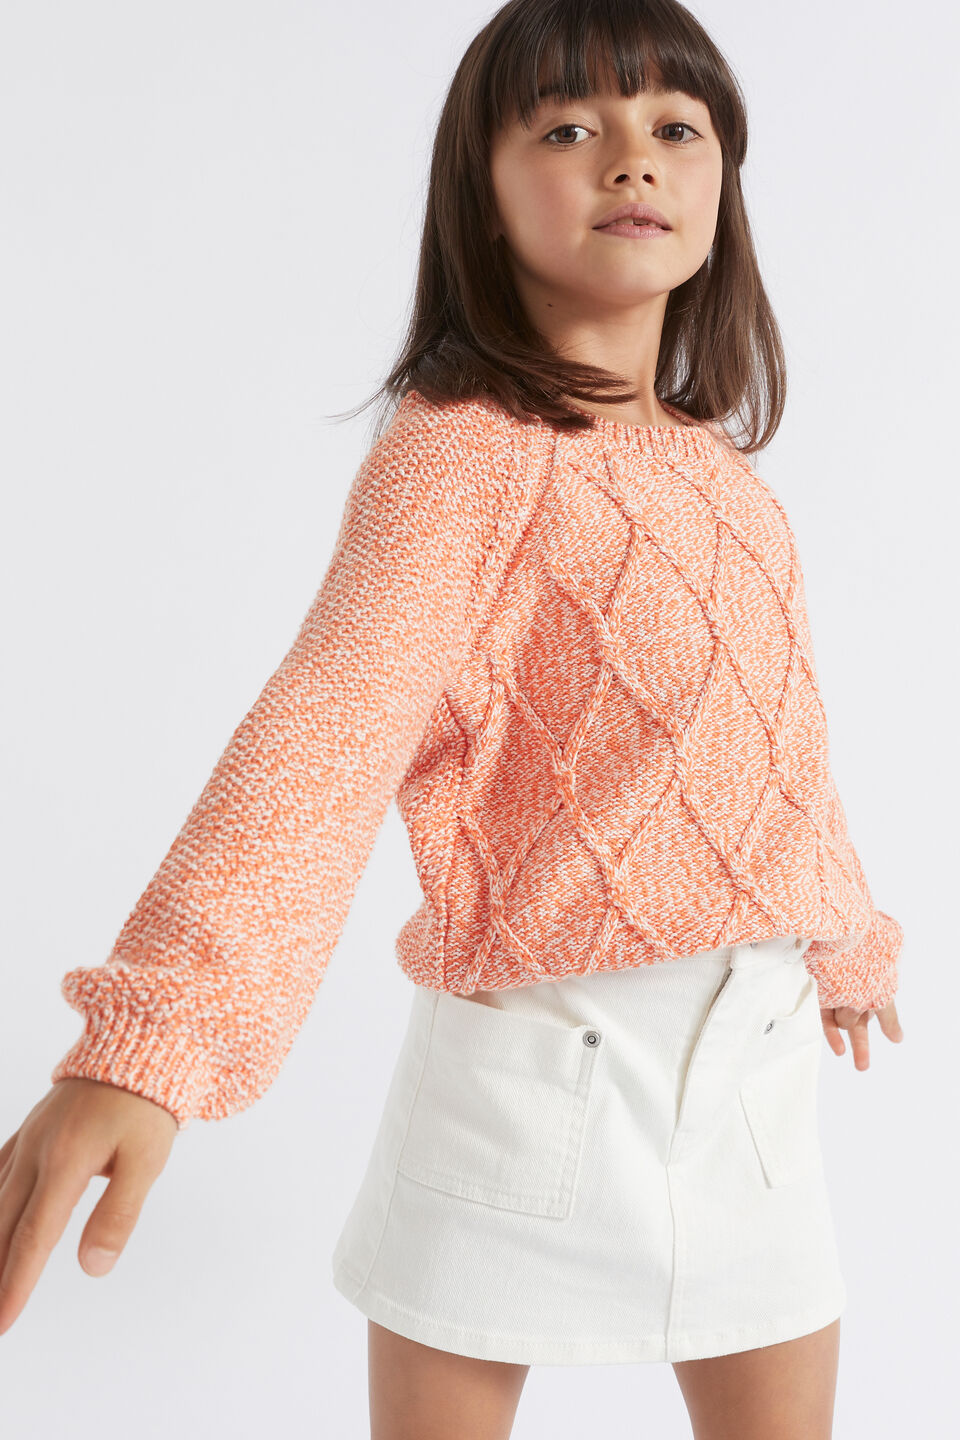 Speckle Cable Knit  Apricot